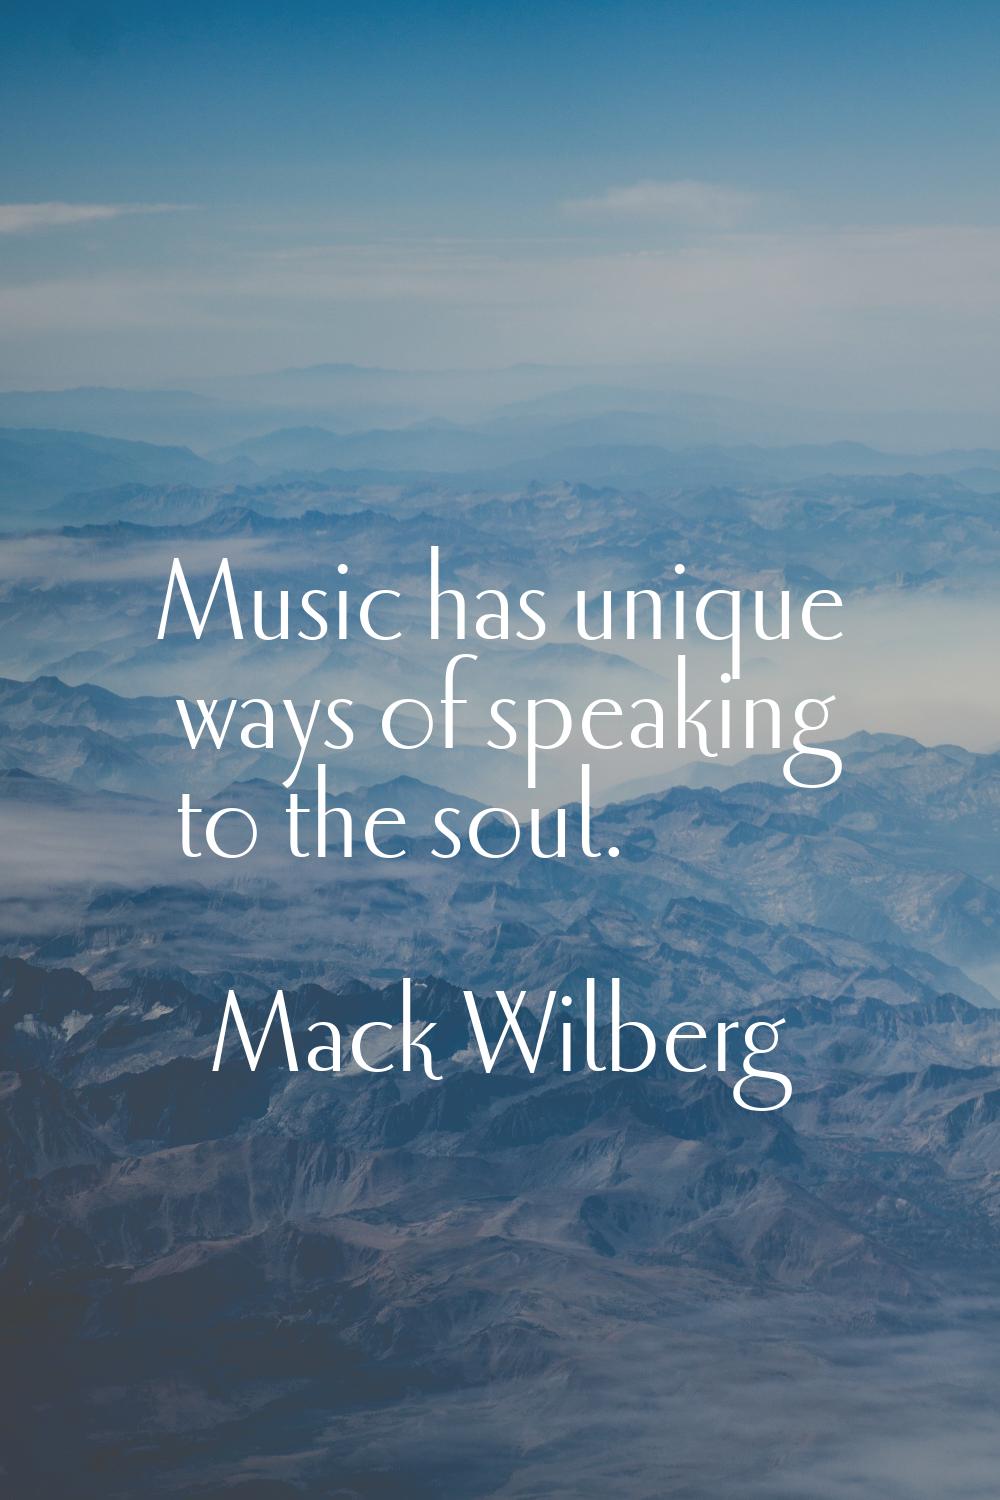 Music has unique ways of speaking to the soul.